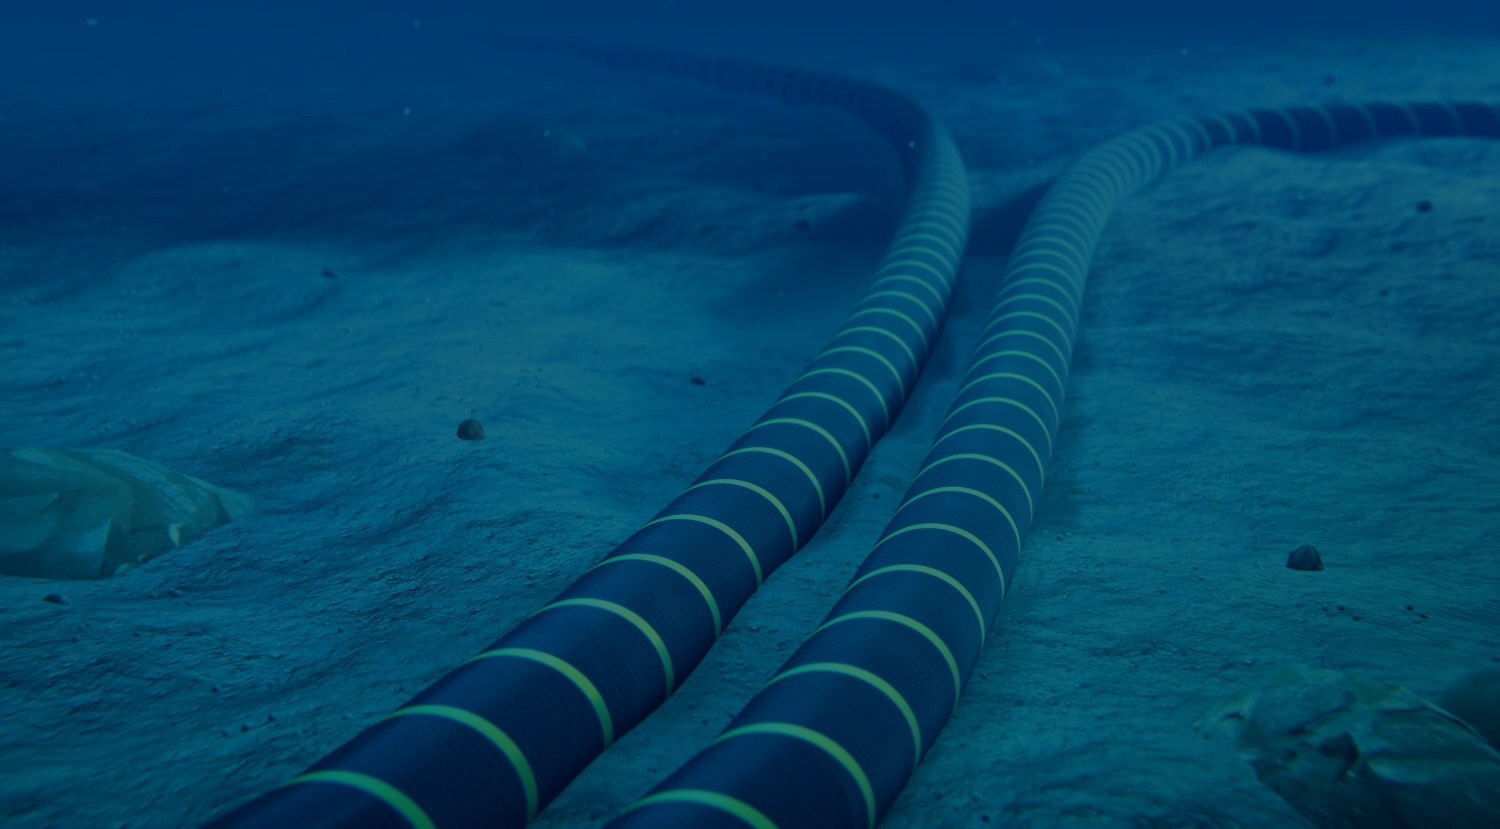 Telecom Egypt Signs Agreement to Extend Medusa Submarine Cable to the Red Sea